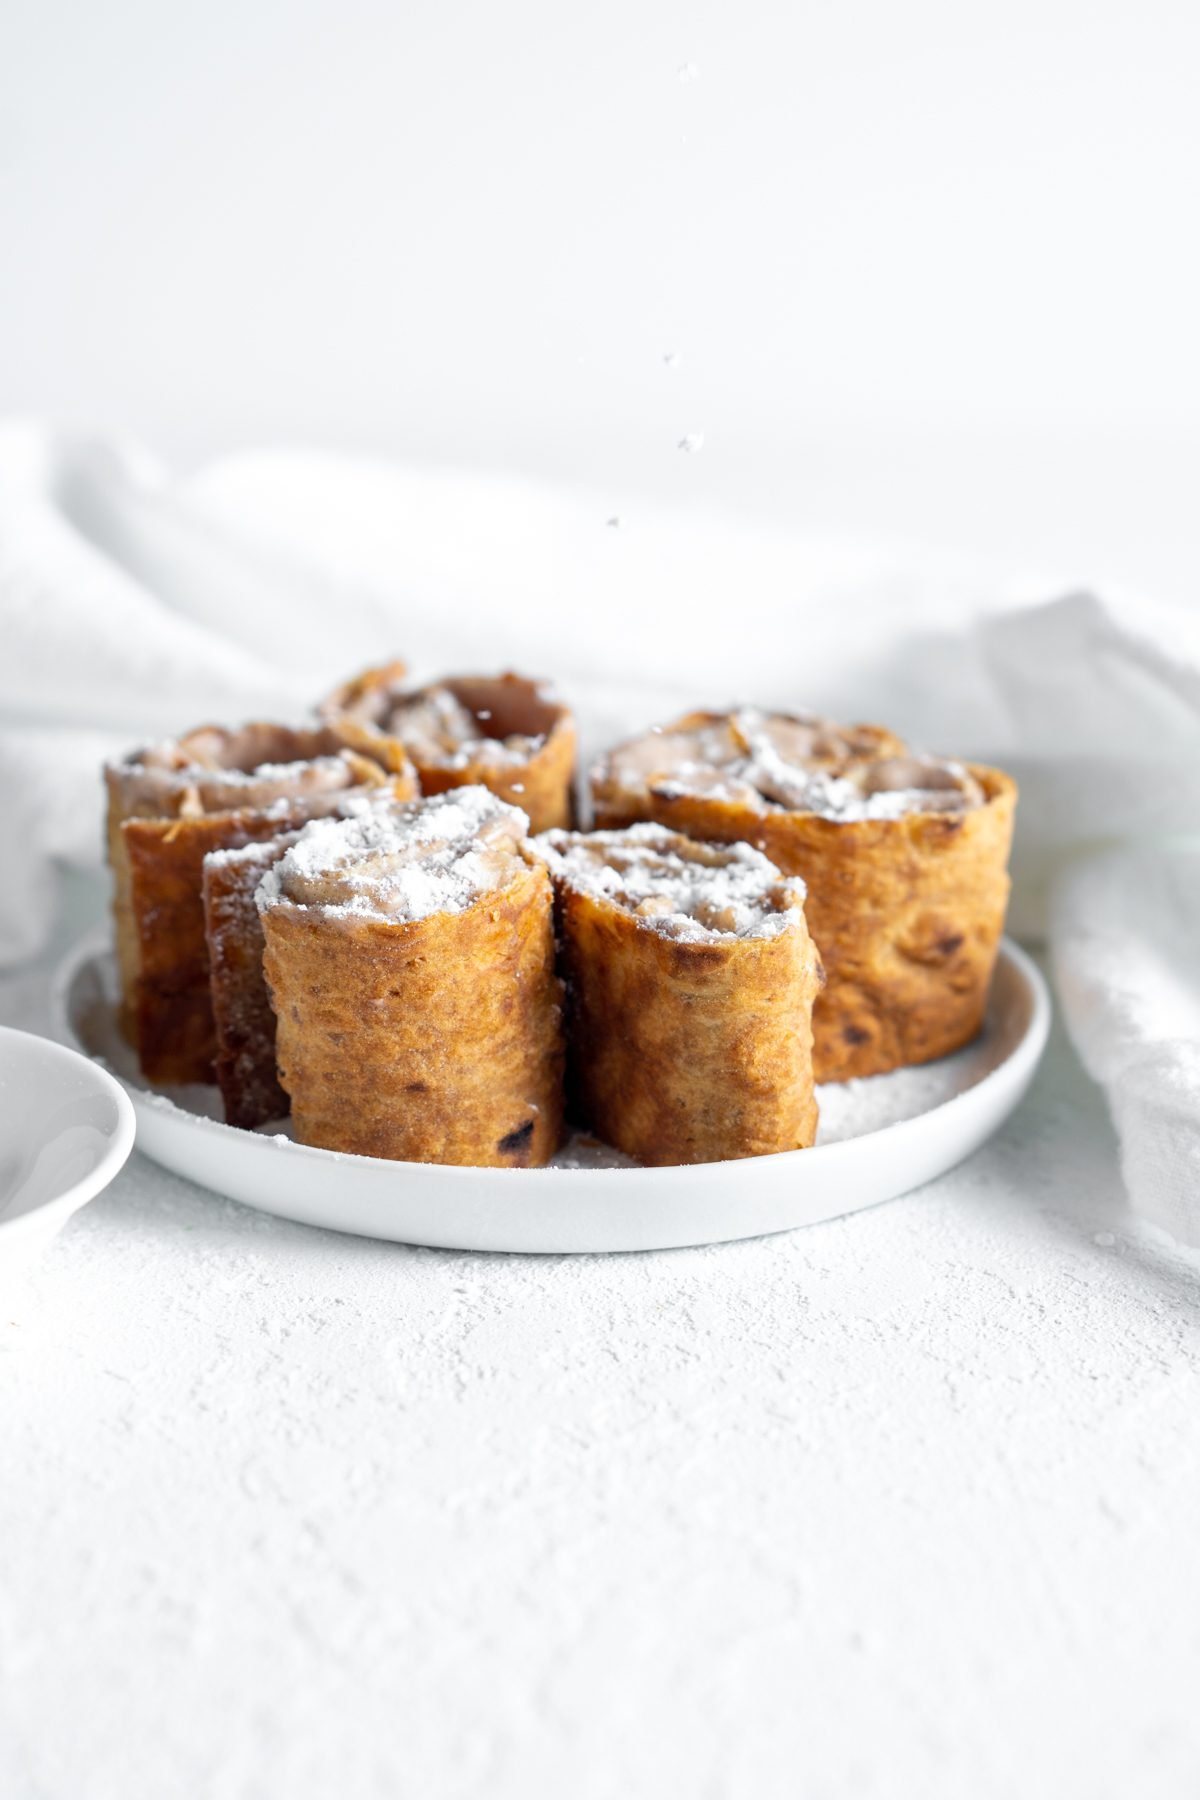 Cinnamon Cream Cheese Roll Ups topped with powdered sugar.